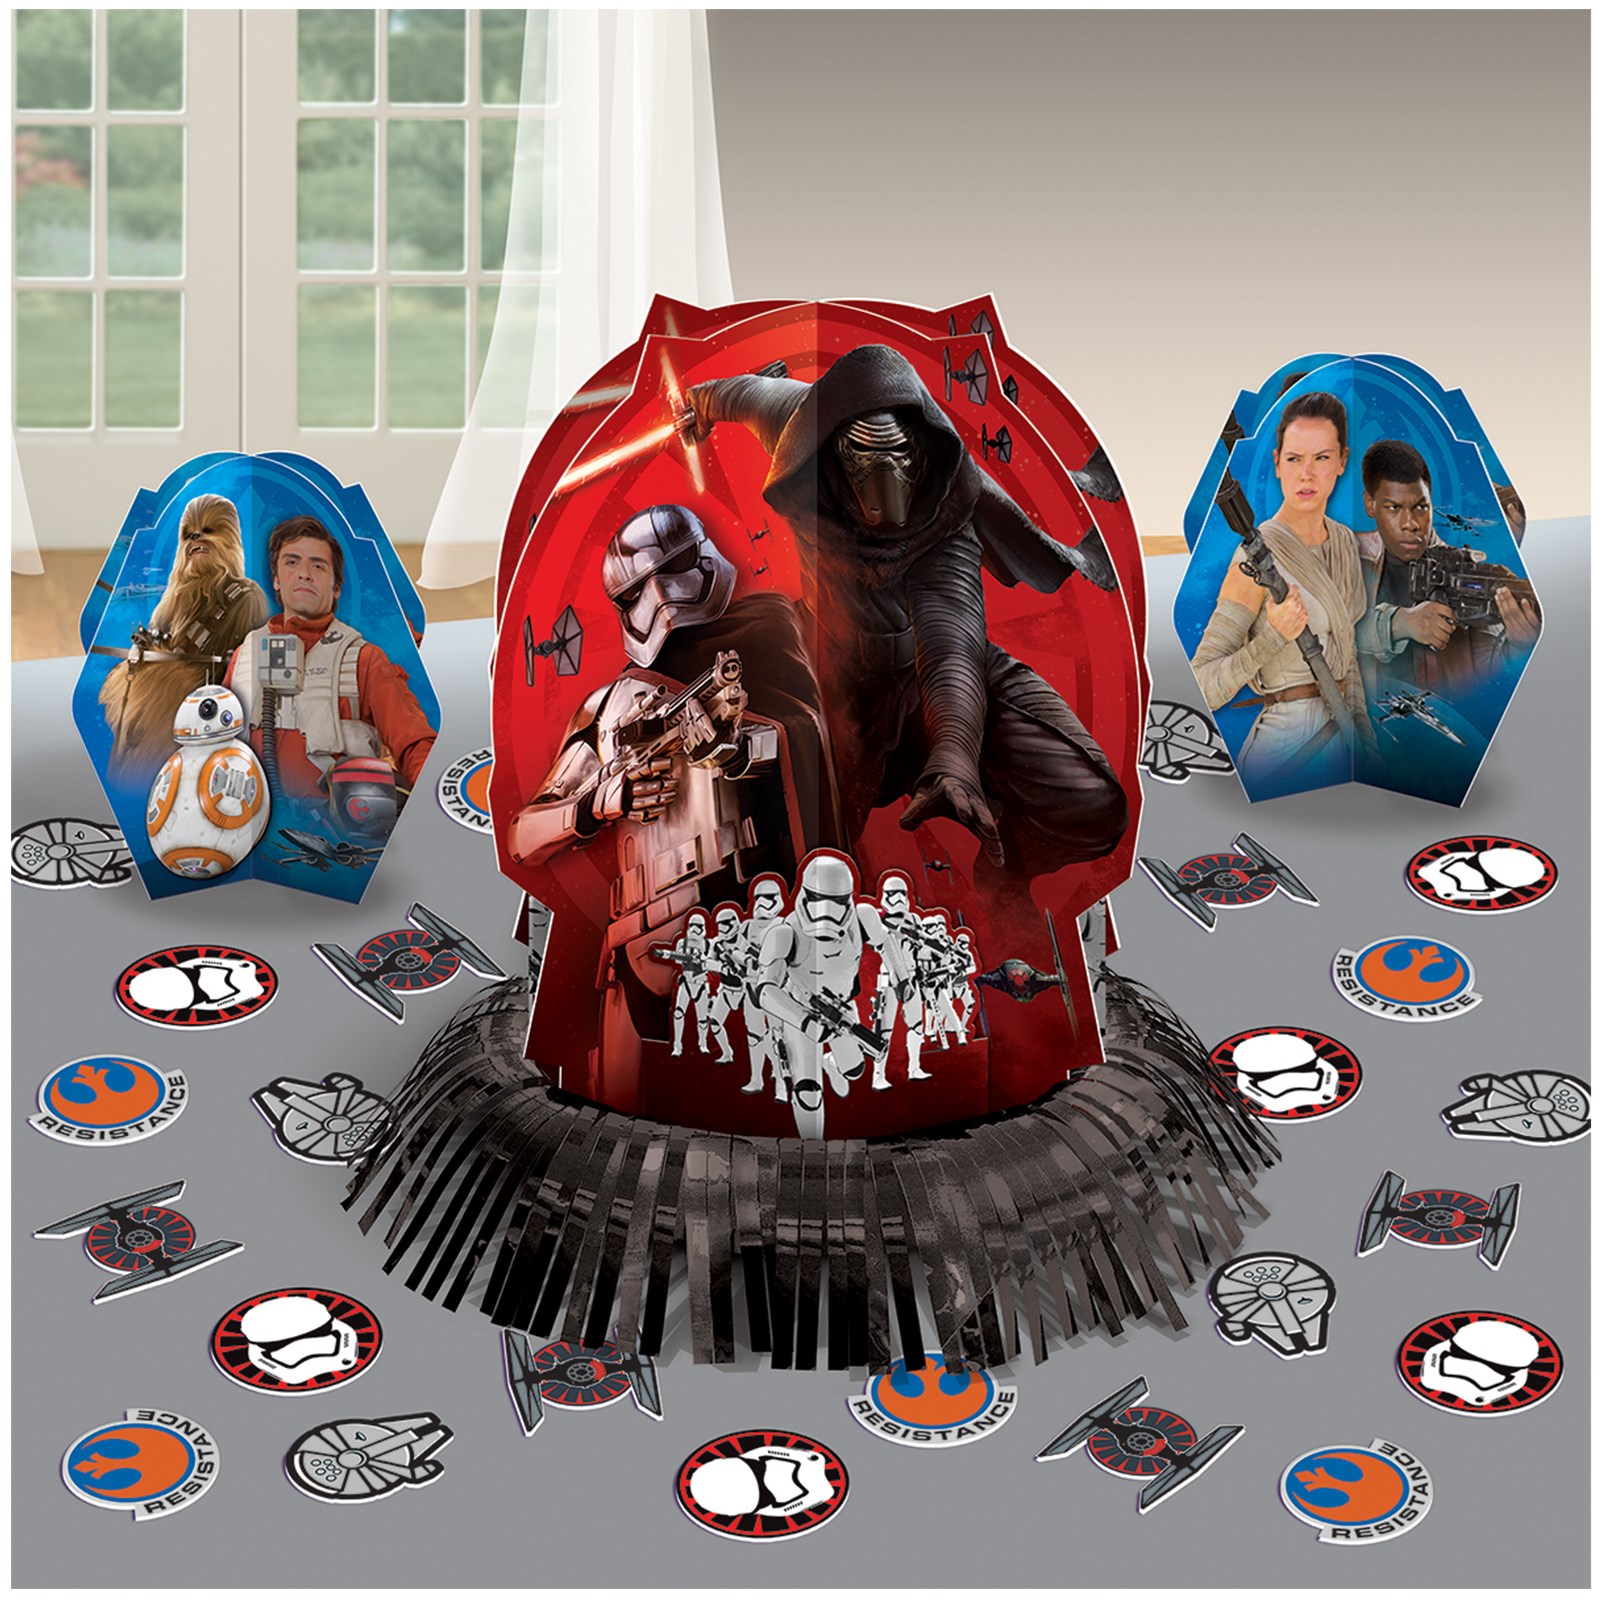 Star Wars 7 The Force Awakens Table Decorating Kit